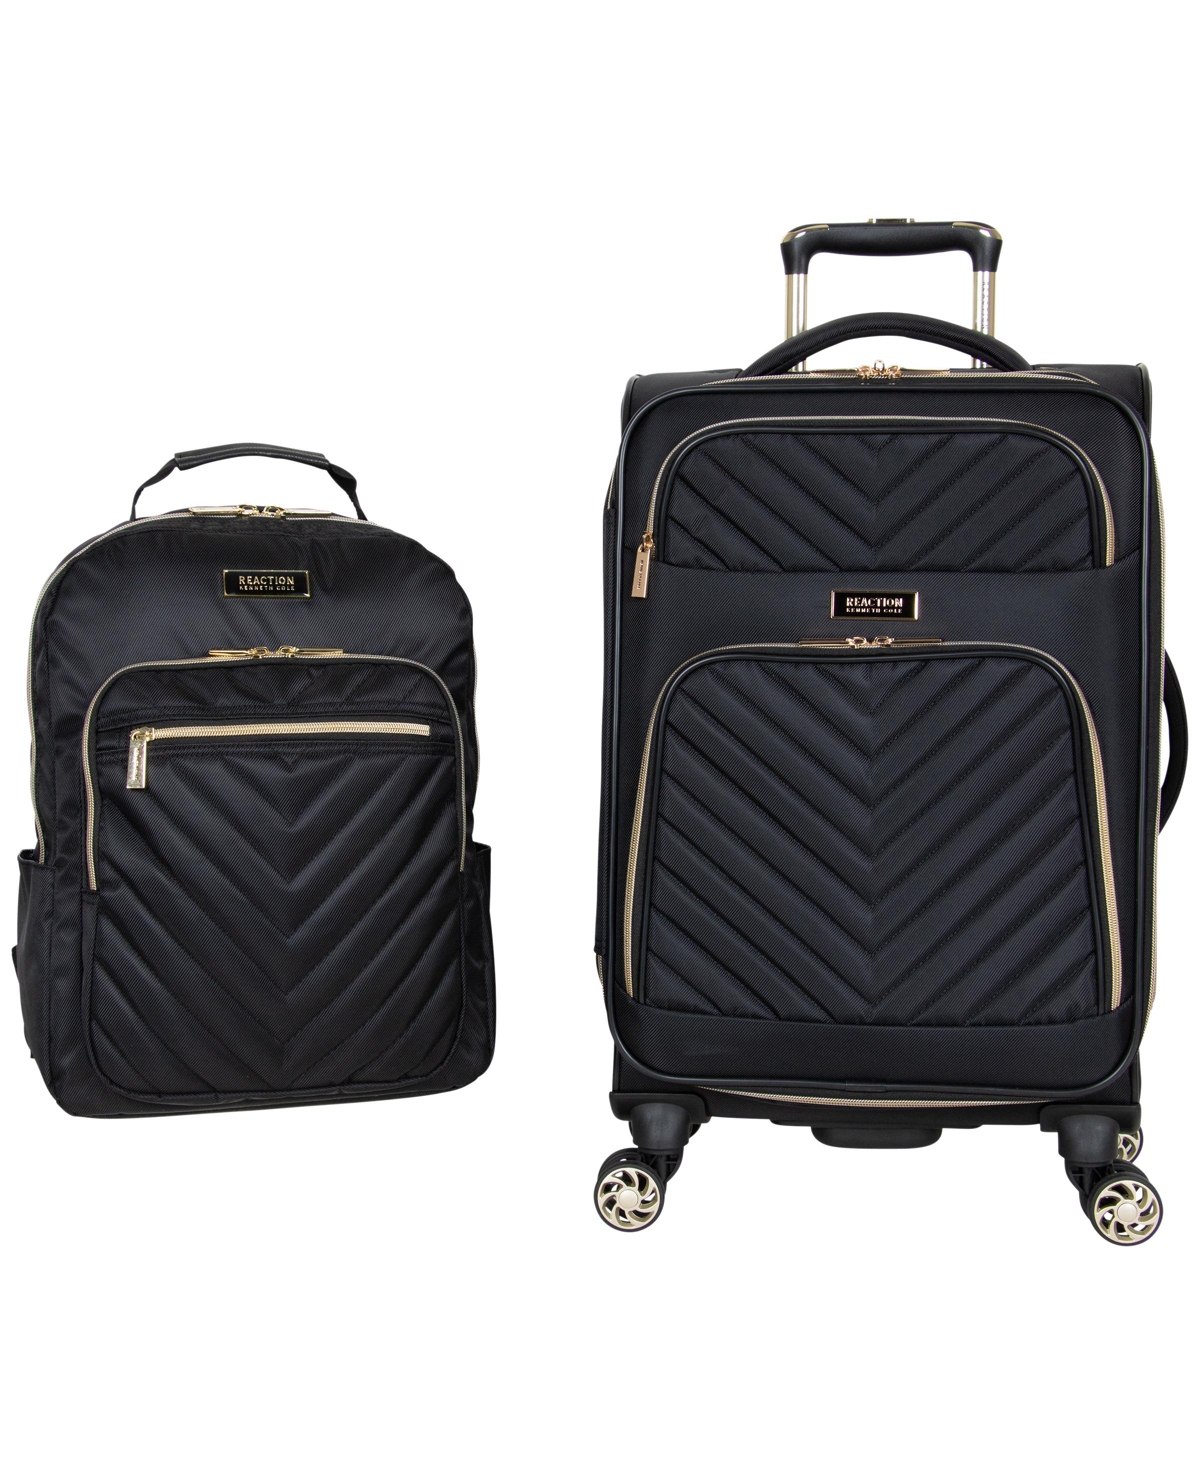 2-Pc. Chelsea 20" Carry-On Matching 15" Laptop Backpack Set - Black